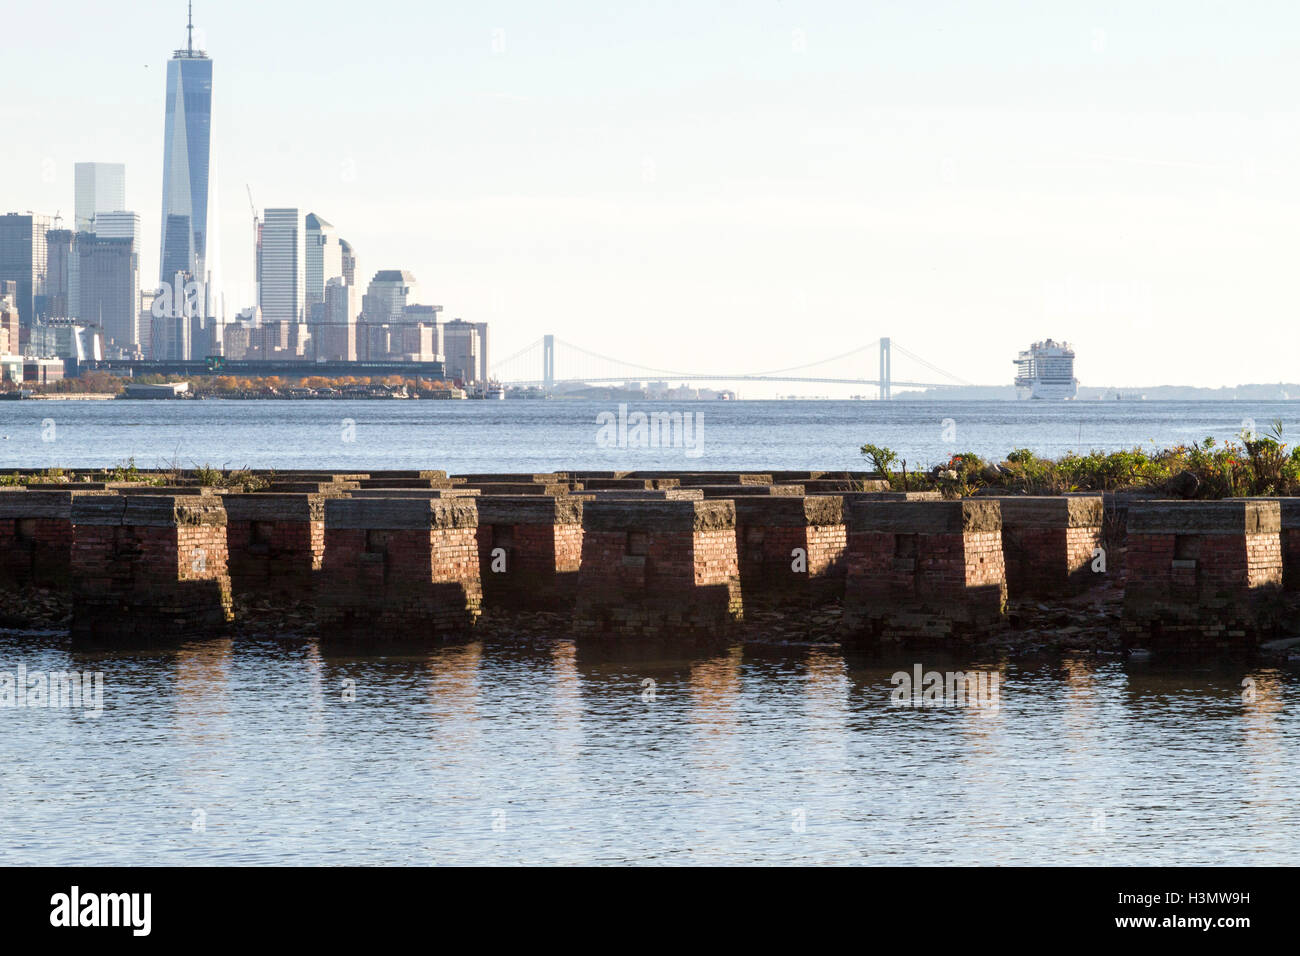 Scenic view of the New York Manhattan skyline seen from across the Hudson River in Edgewater, New Jersey. Stock Photo